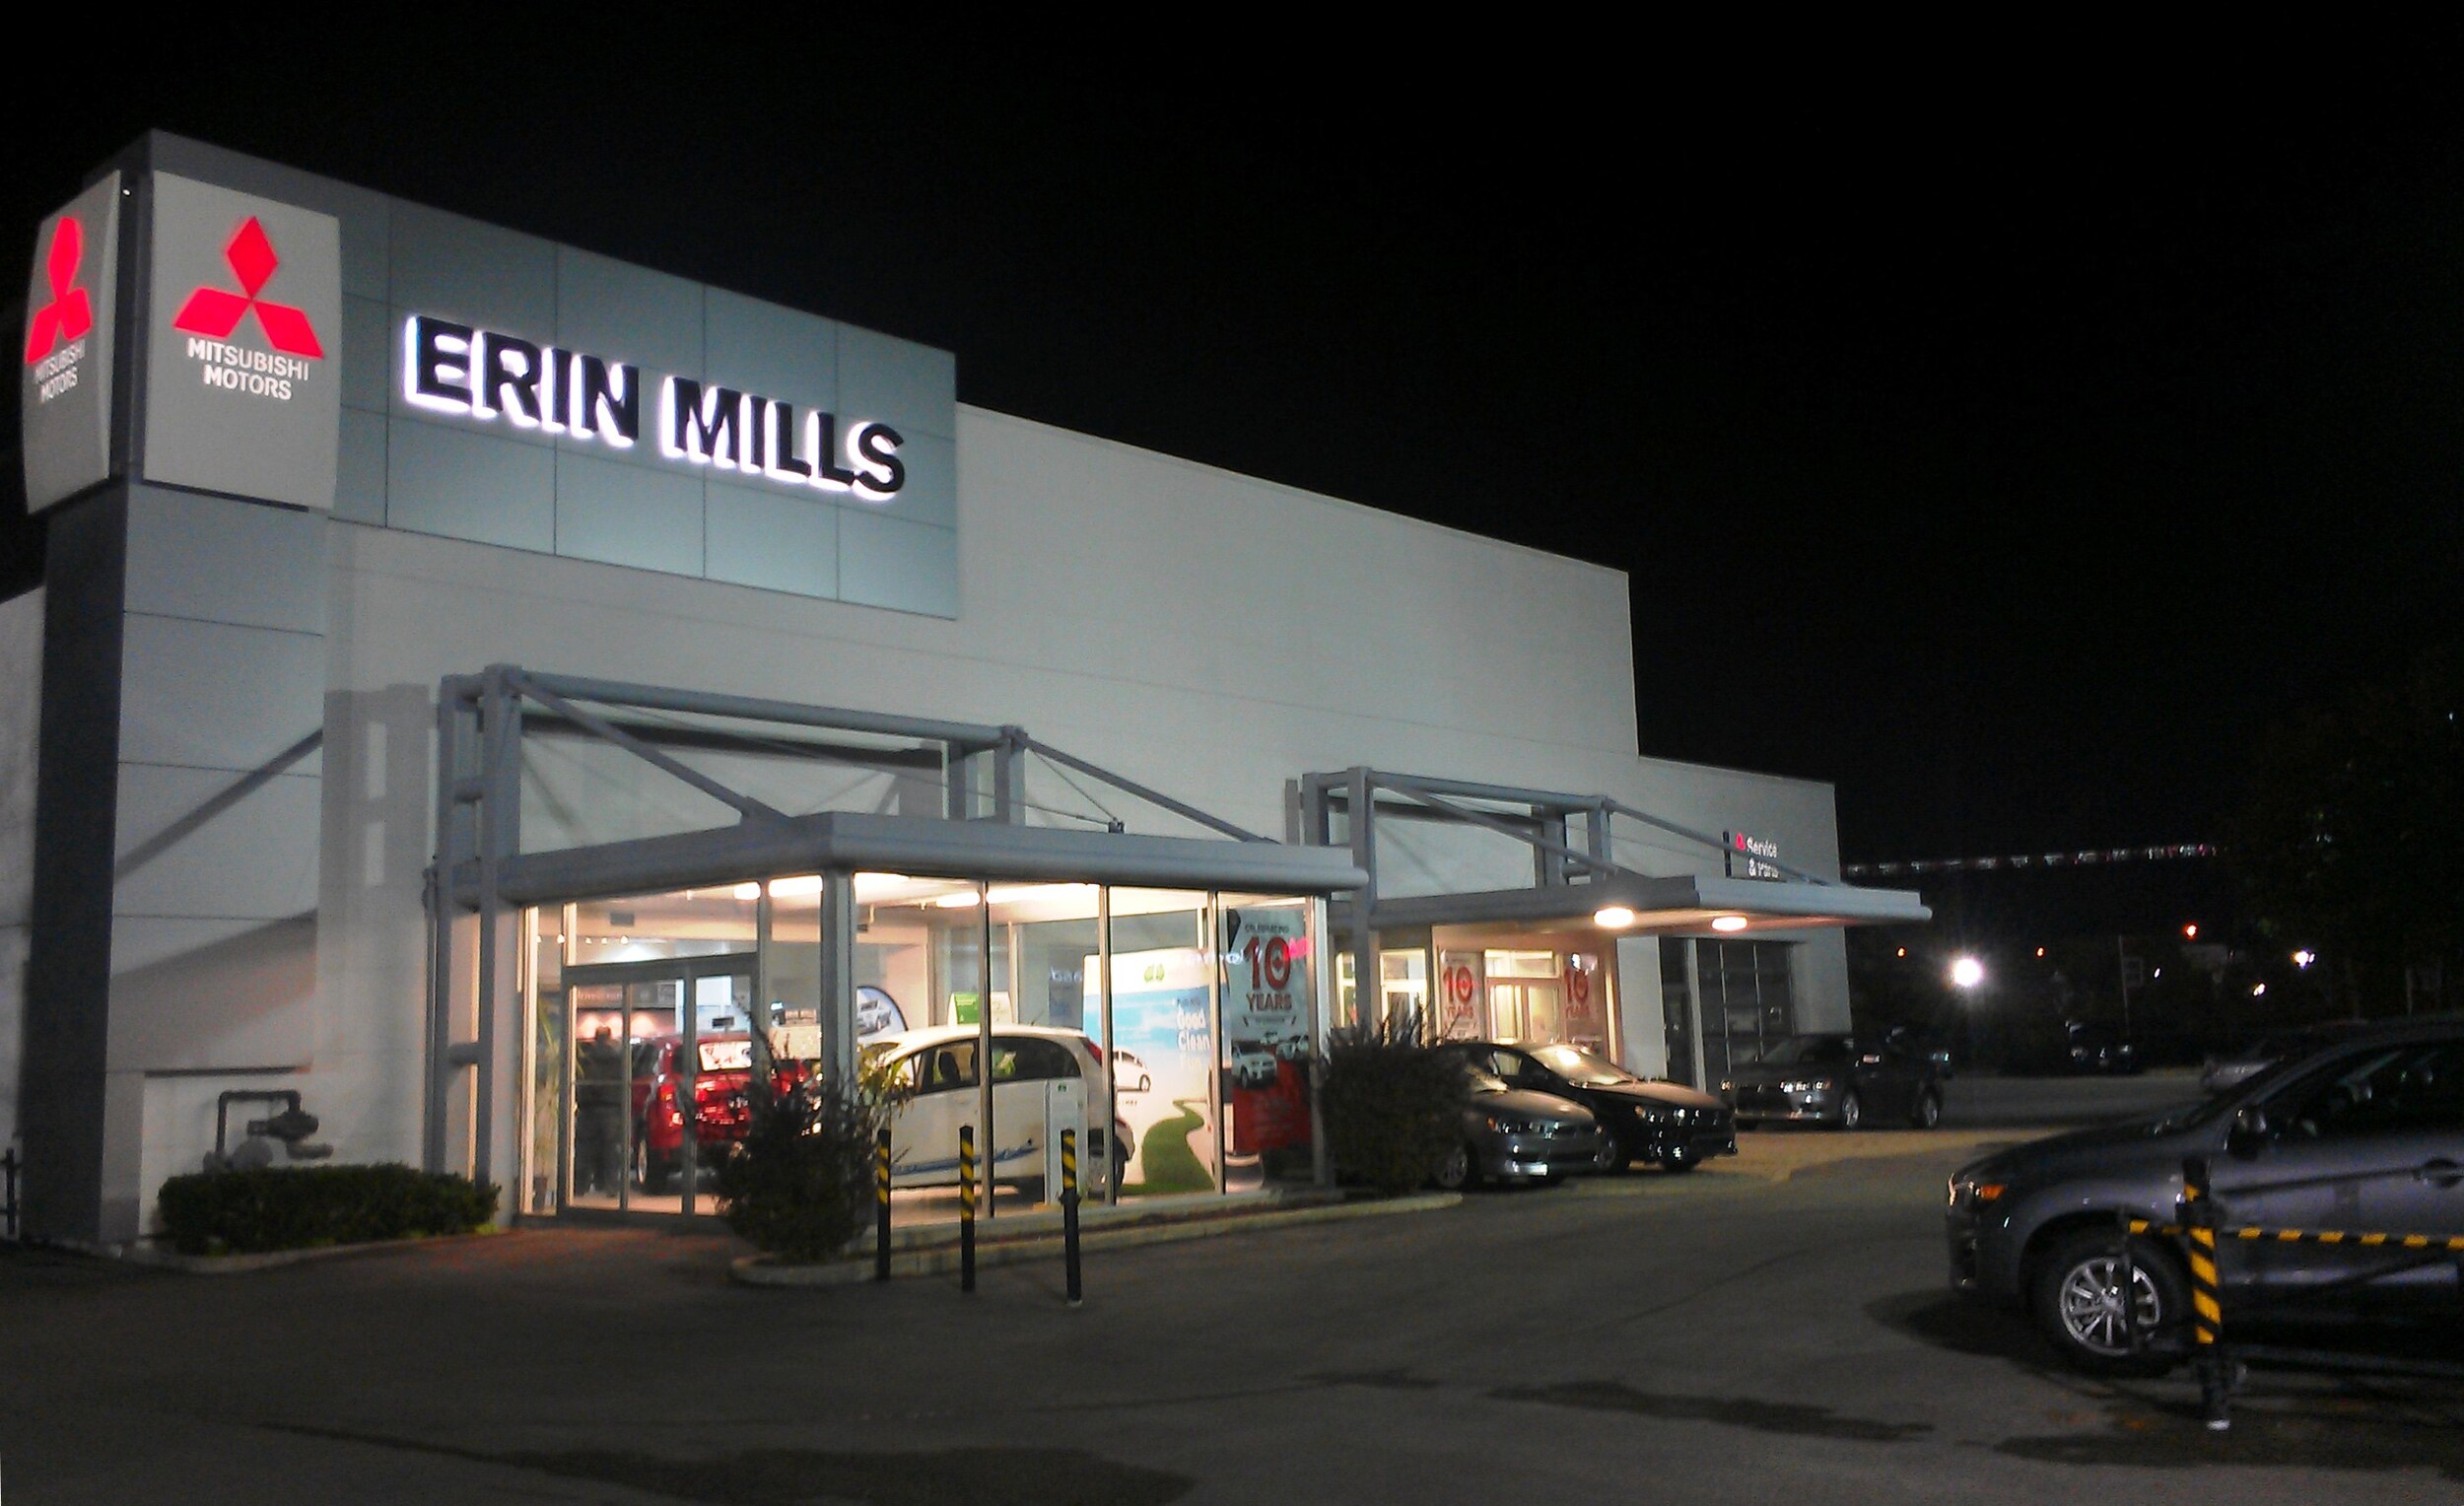 Erin mills ford used cars #10